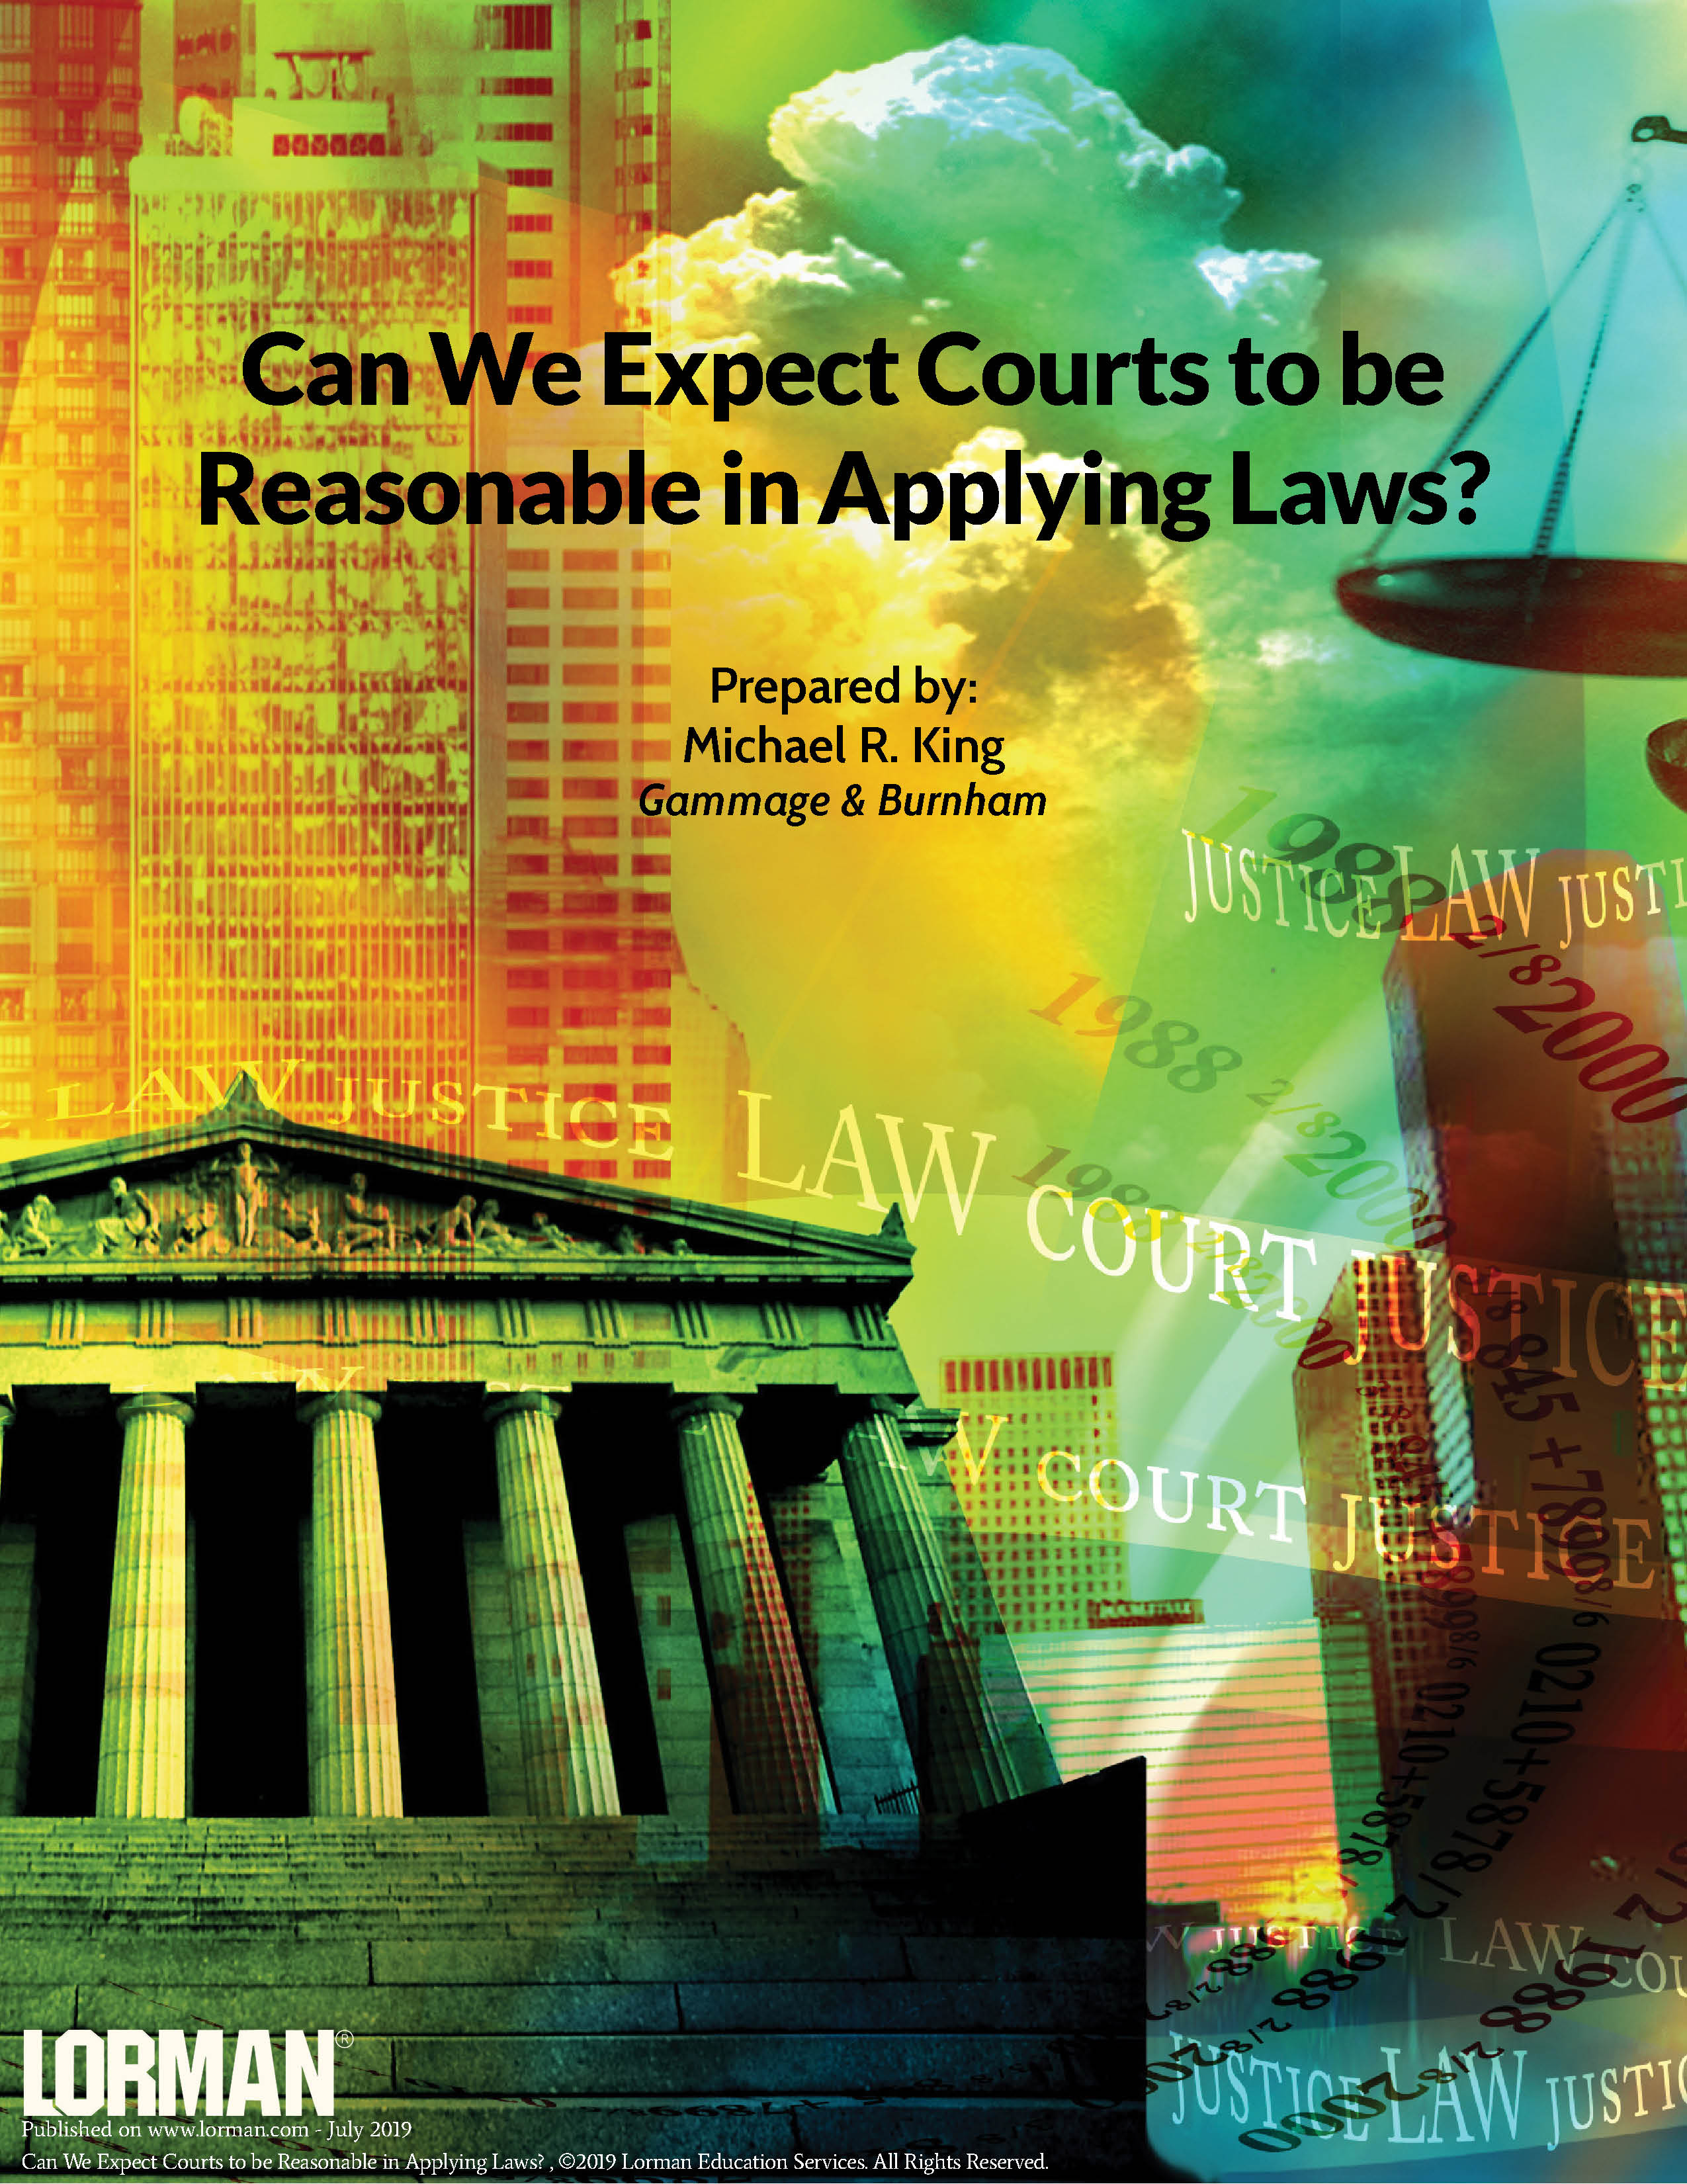 Can We Expect Courts to be Reasonable in Applying Laws?